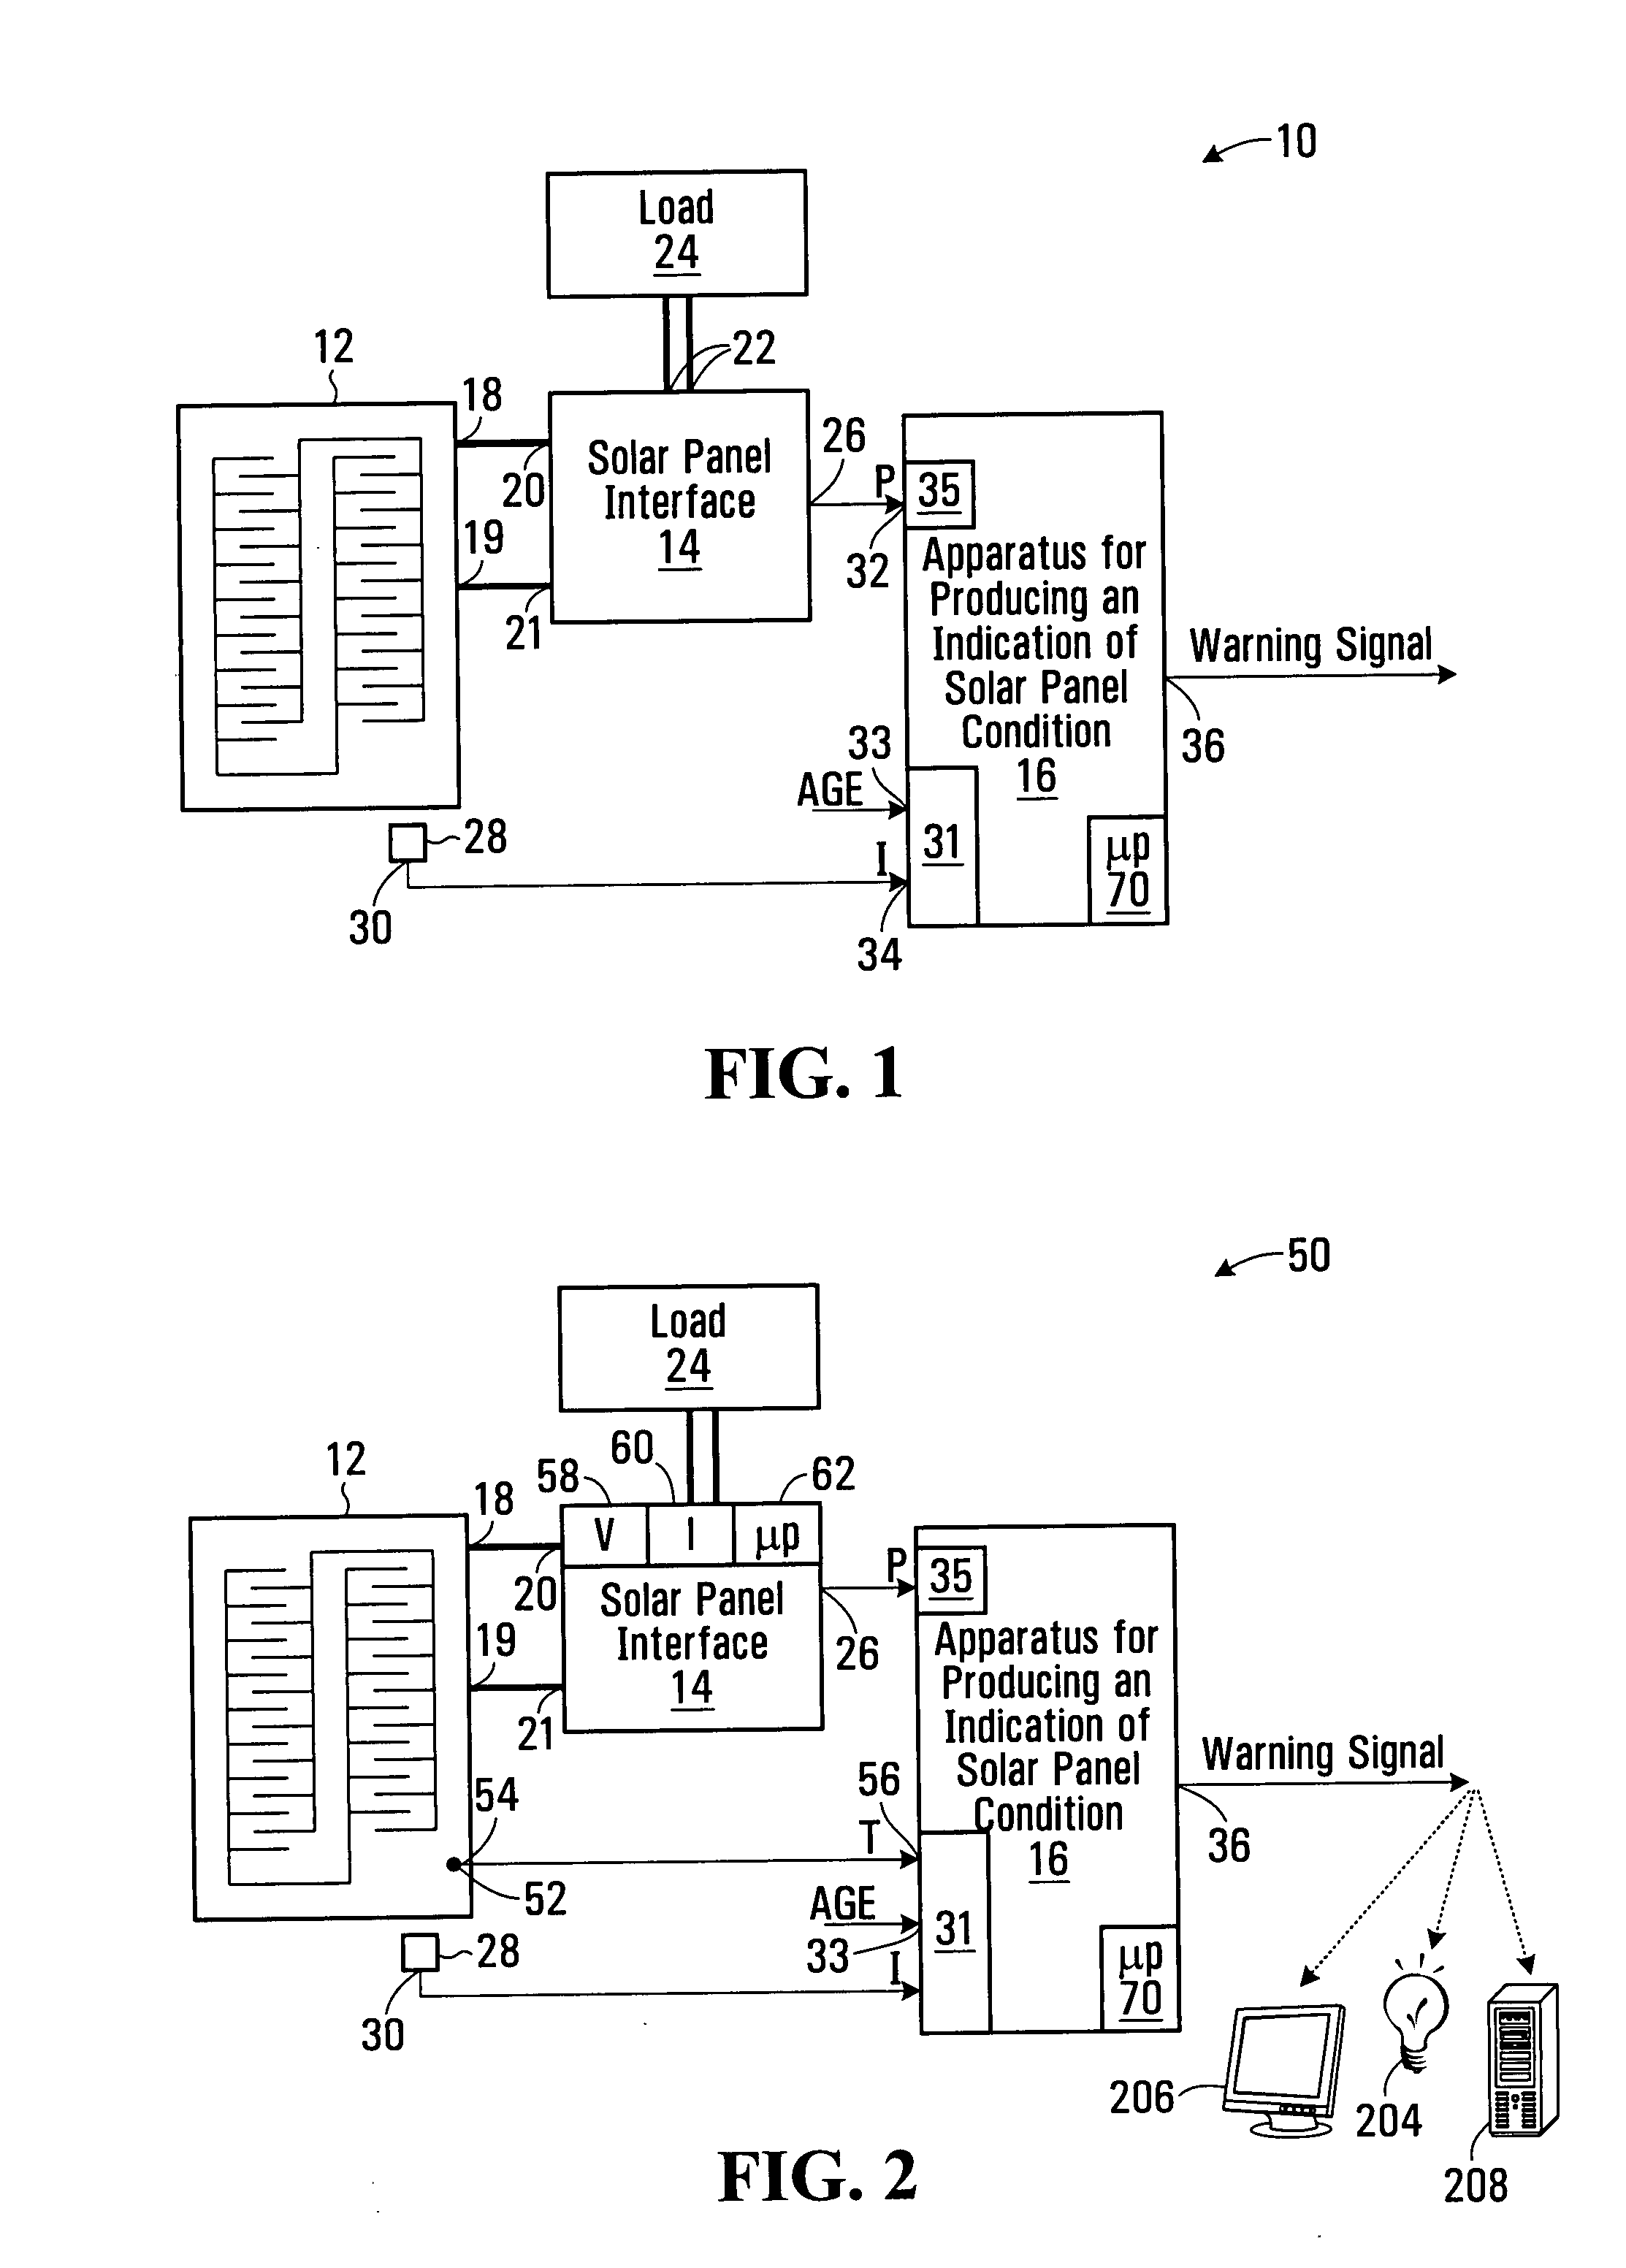 Method and apparatus for producing an indication of solar panel condition